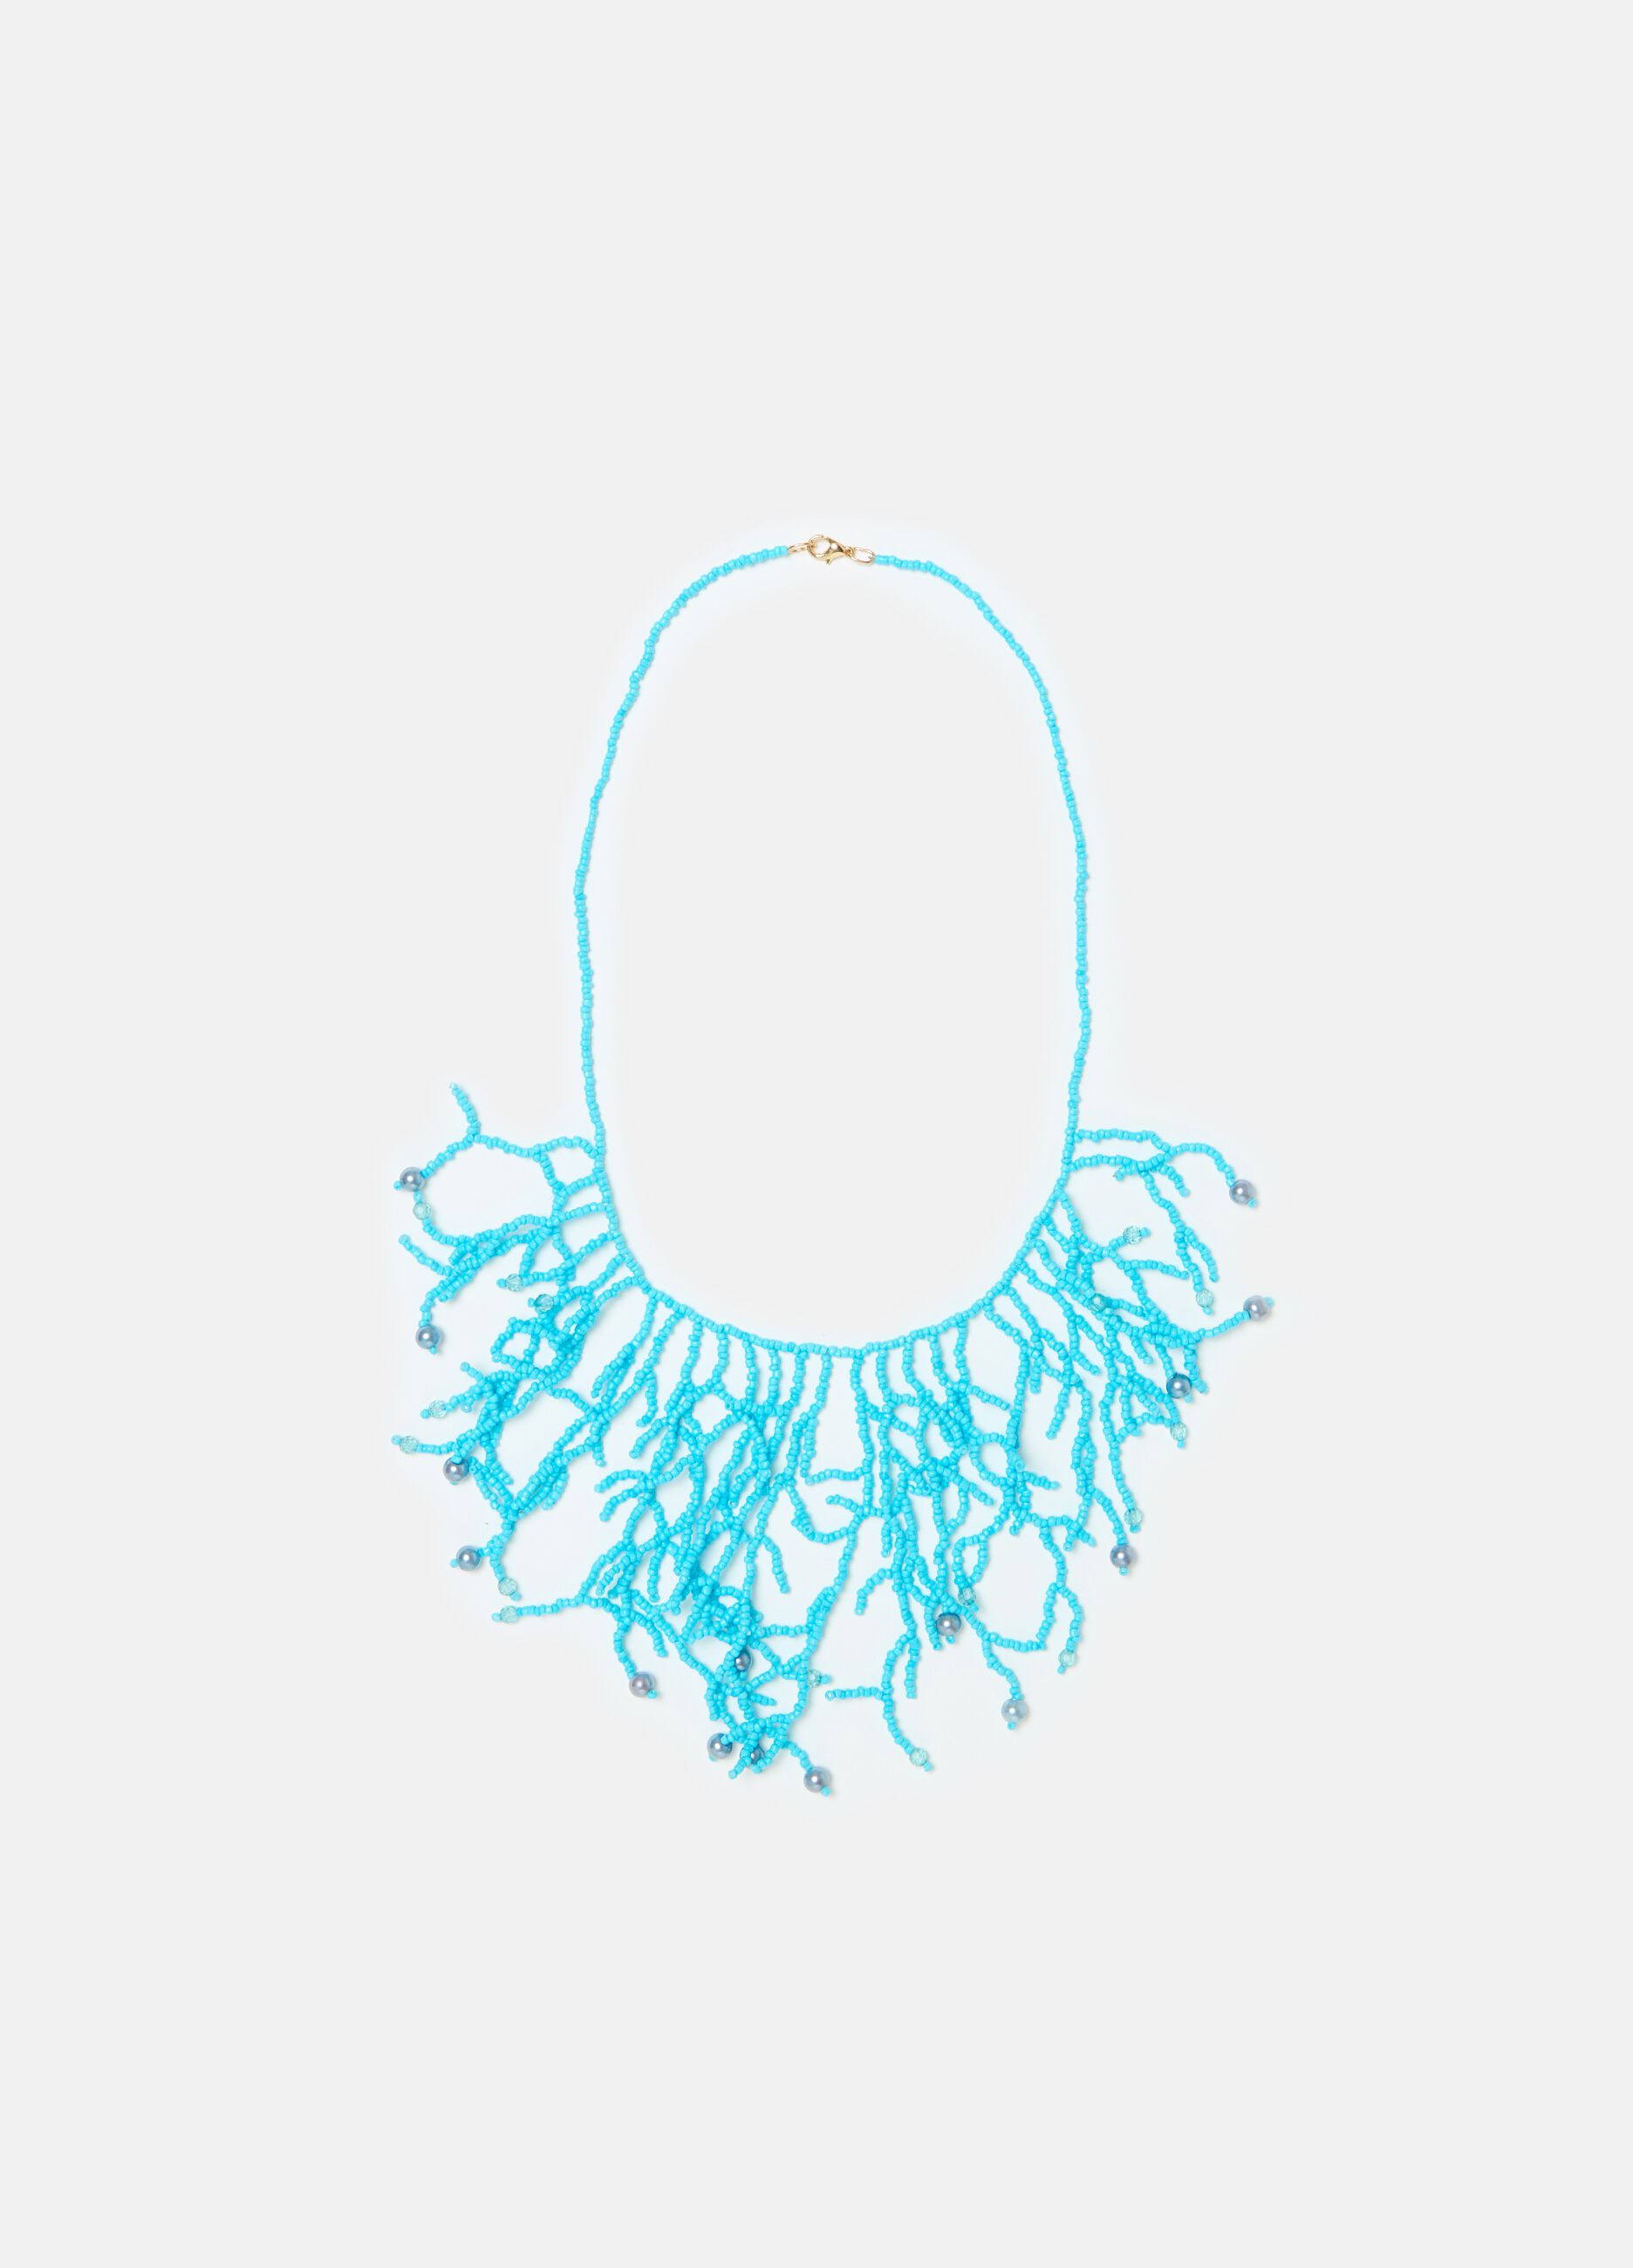 Positano summer necklace with coral-shaped beads